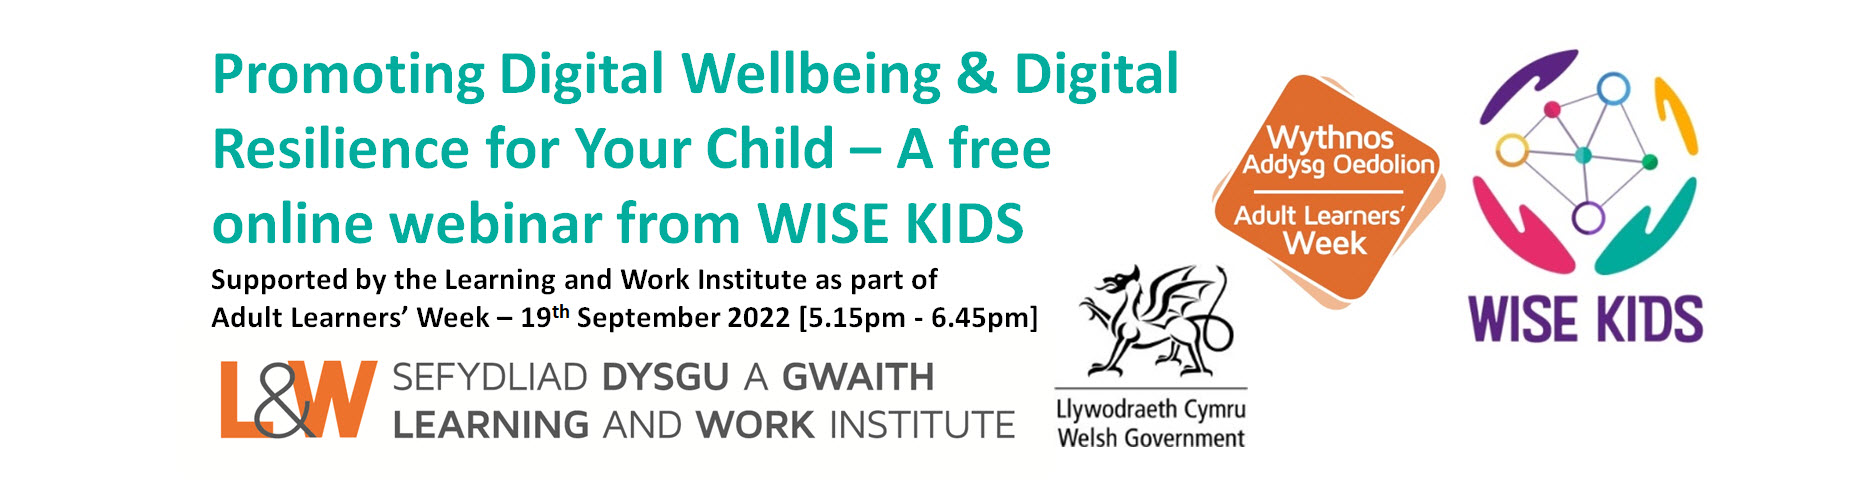 how-to-support-children-to-be-critical-thinkers-online-and-develop-their-digital-resilience-and-wellbeing-a-free-online-webinar